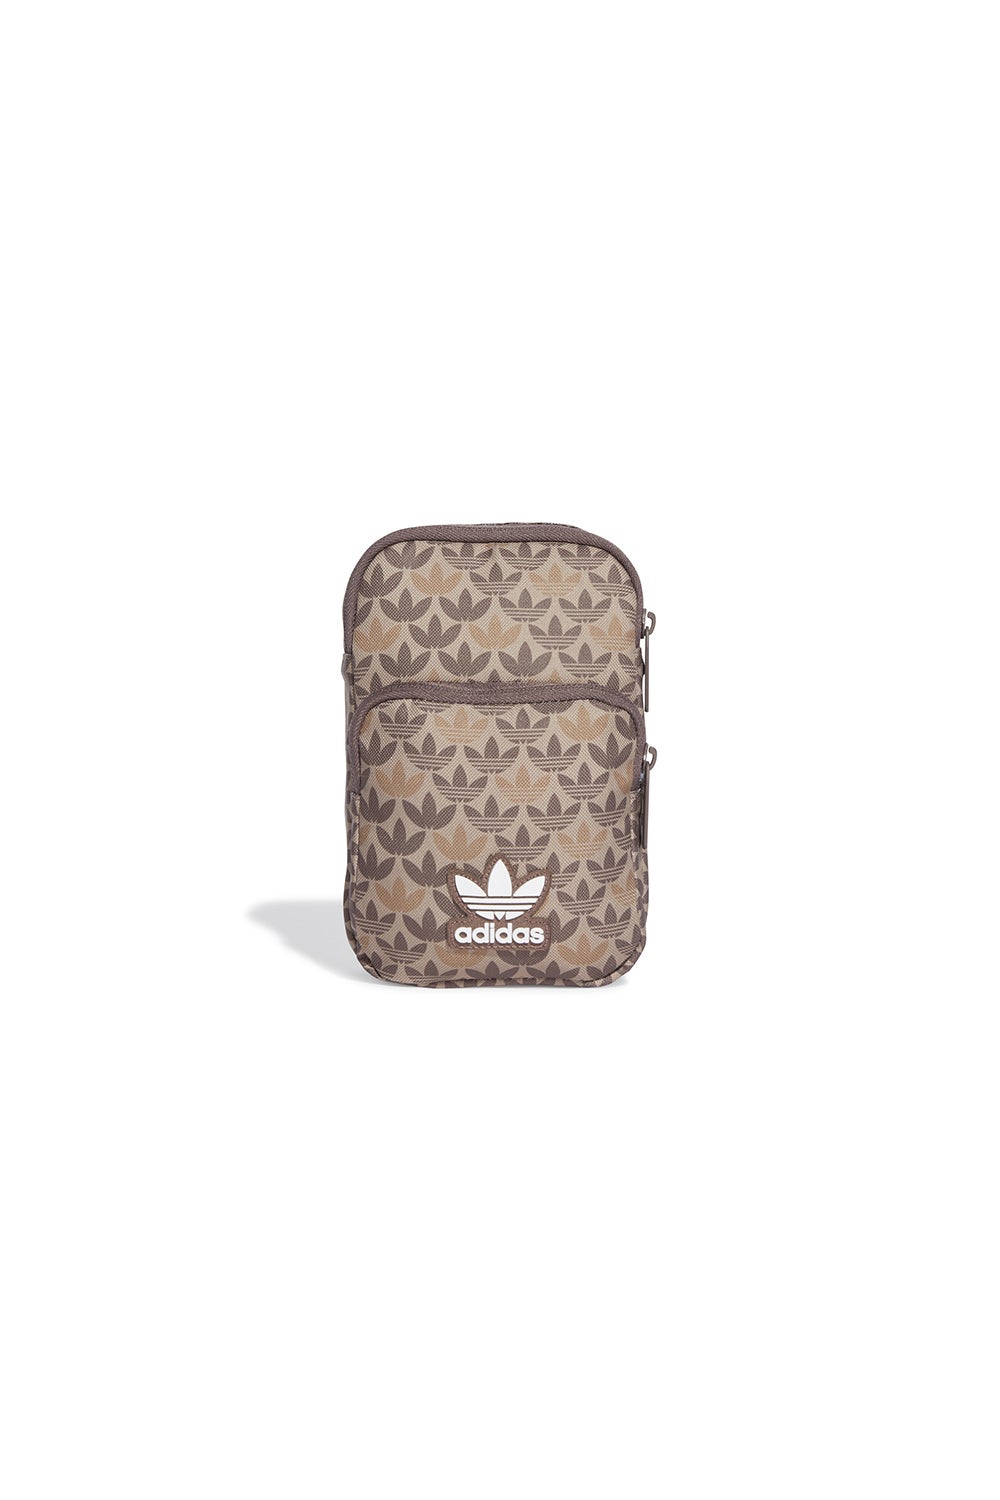 Adidas Bags Skirts Shoes - Buy Adidas Bags Skirts Shoes online in India